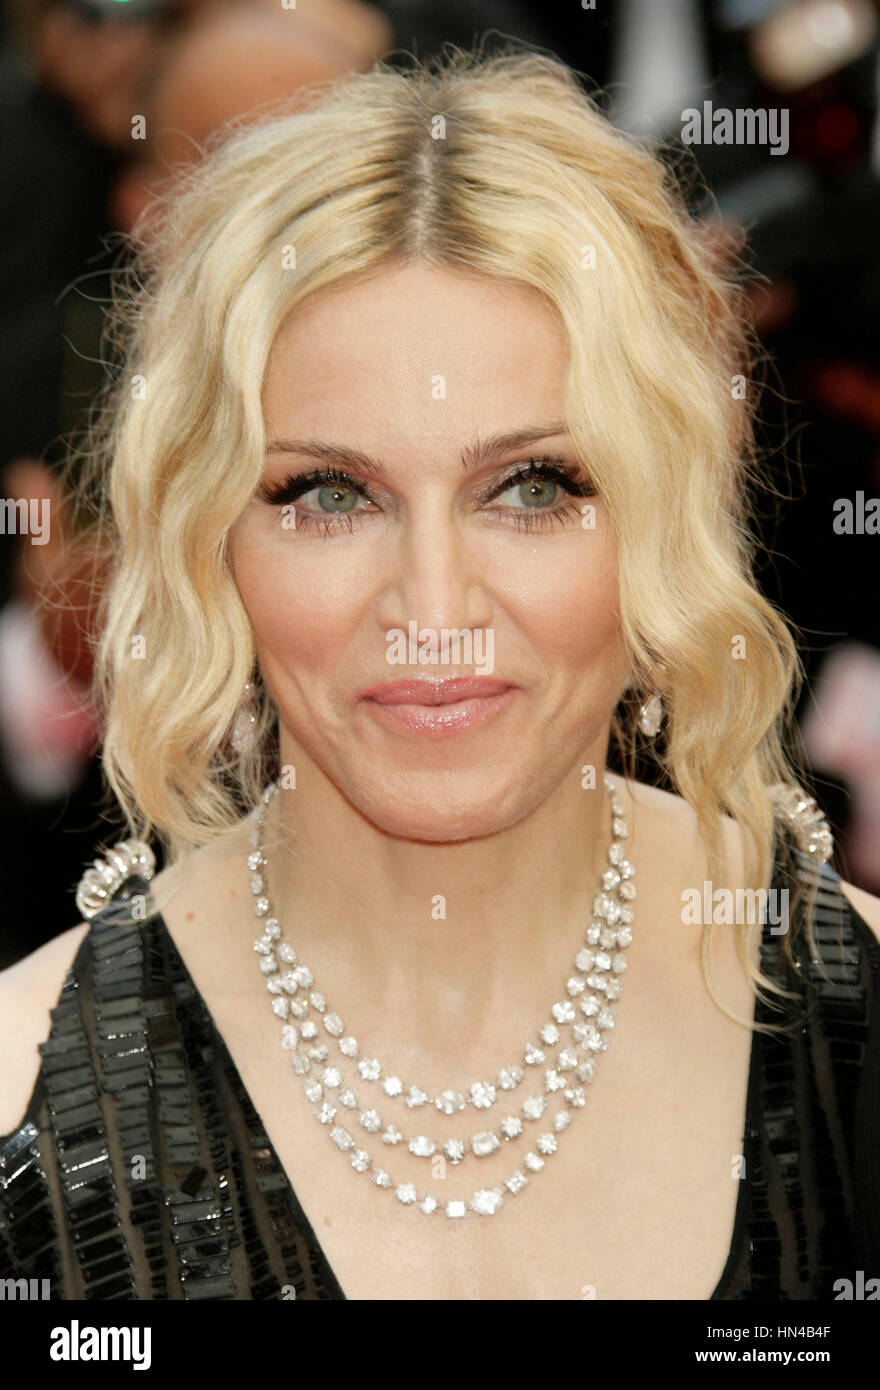 Madonna arrives at Palais des Festivals during the 61st International Cannes Film Festival on May 21, 2008 in Cannes, France. Photo by Francis Specker Stock Photo